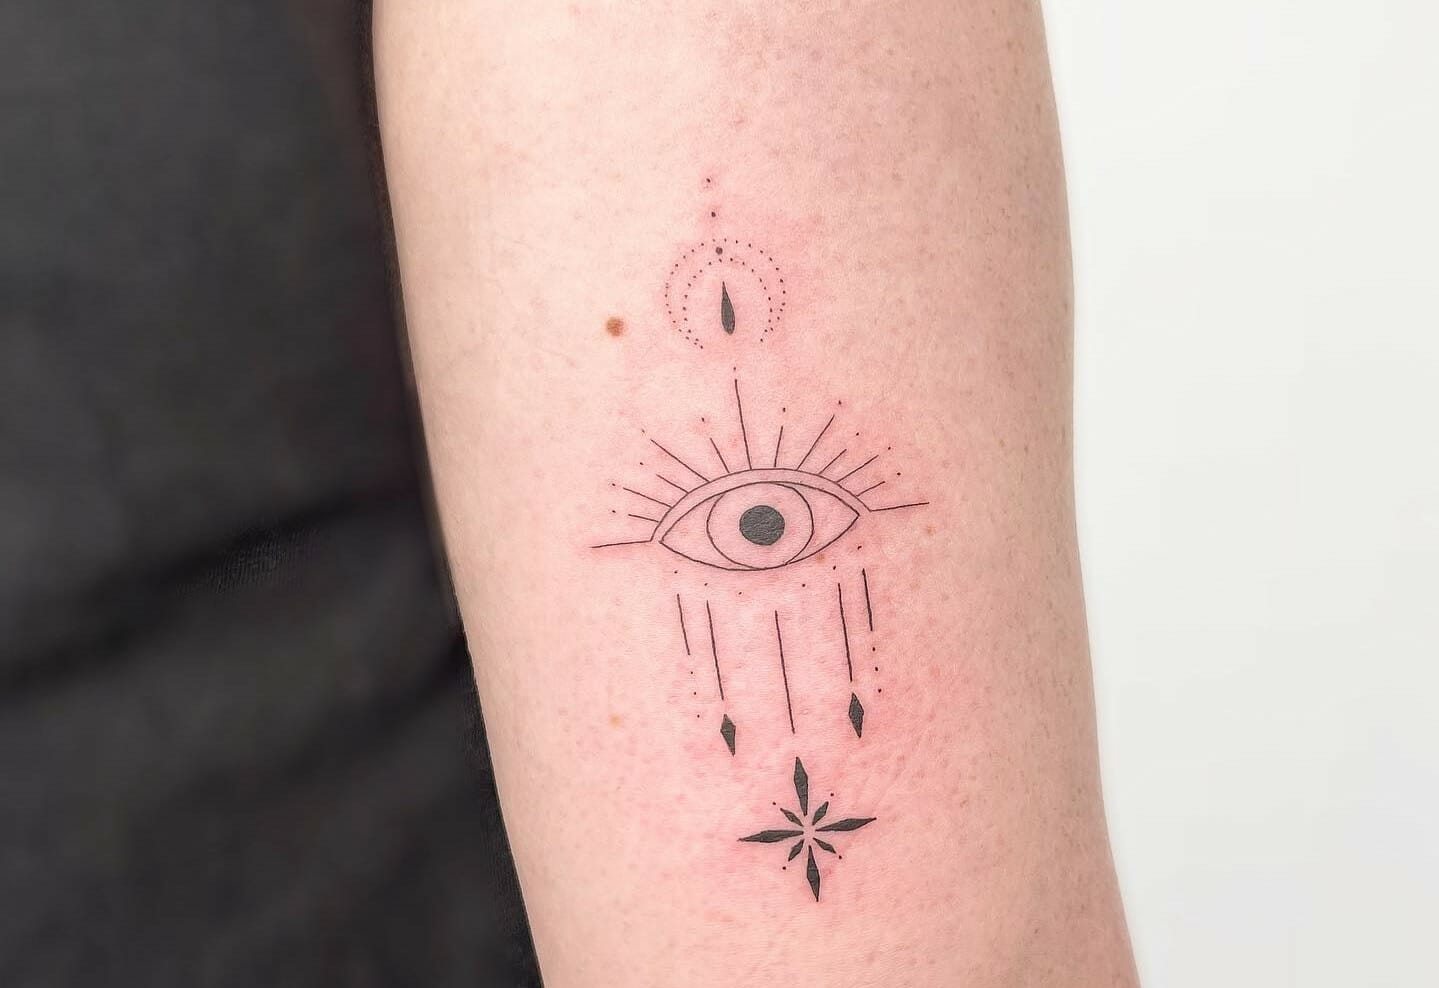 Evil Eye Tattoo Meaning The Deeper Meanings Behind Popular Tattoo Designs   Impeccable Nest